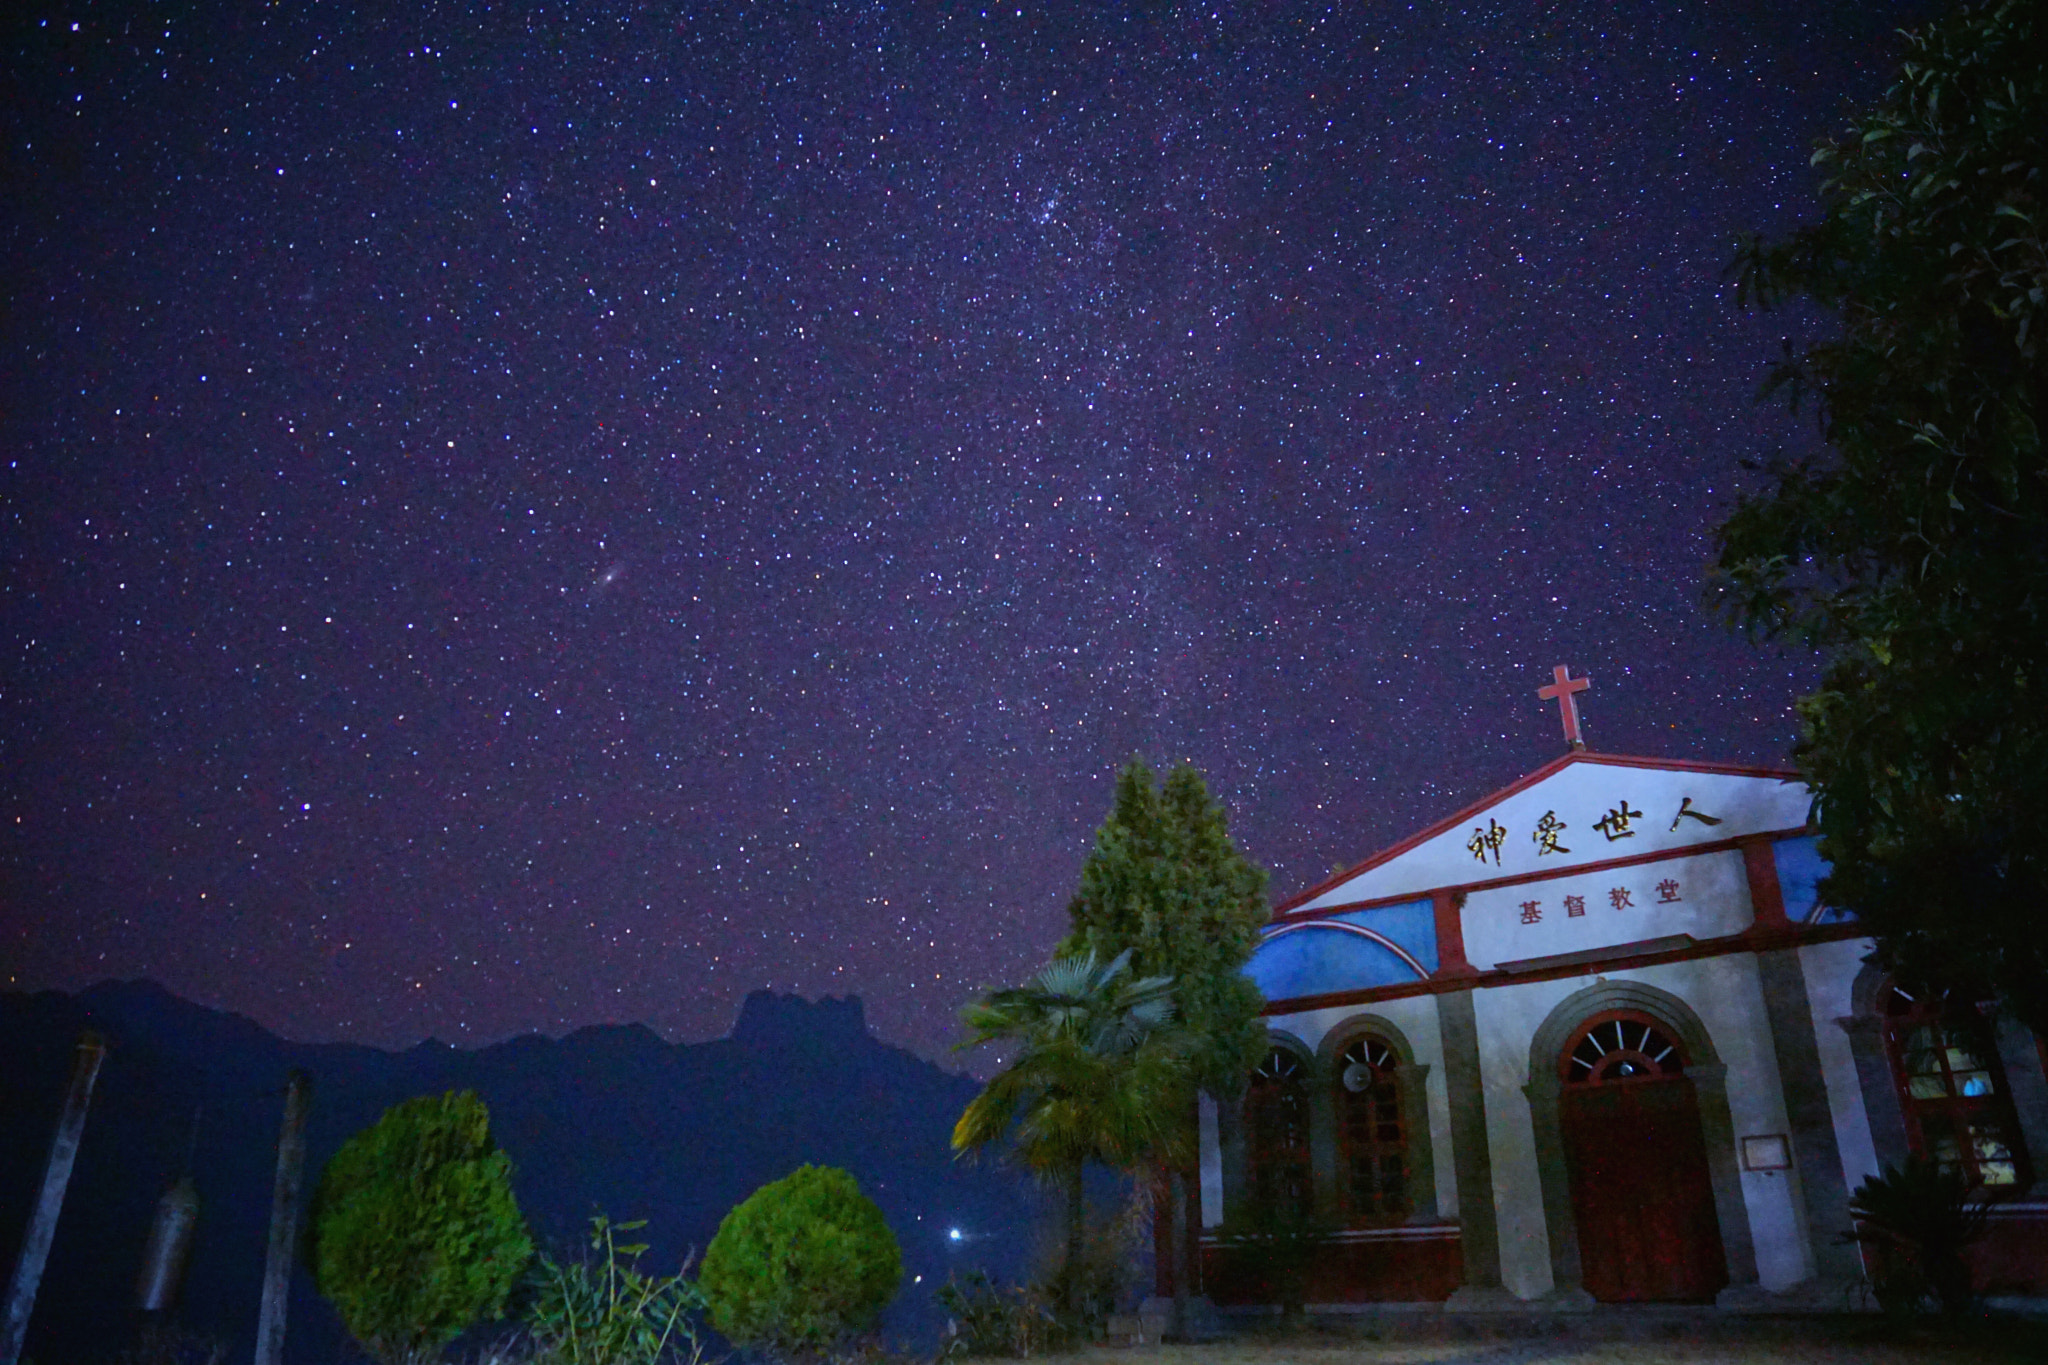 Sony a6000 sample photo. Under the stars of the old church in camden photography